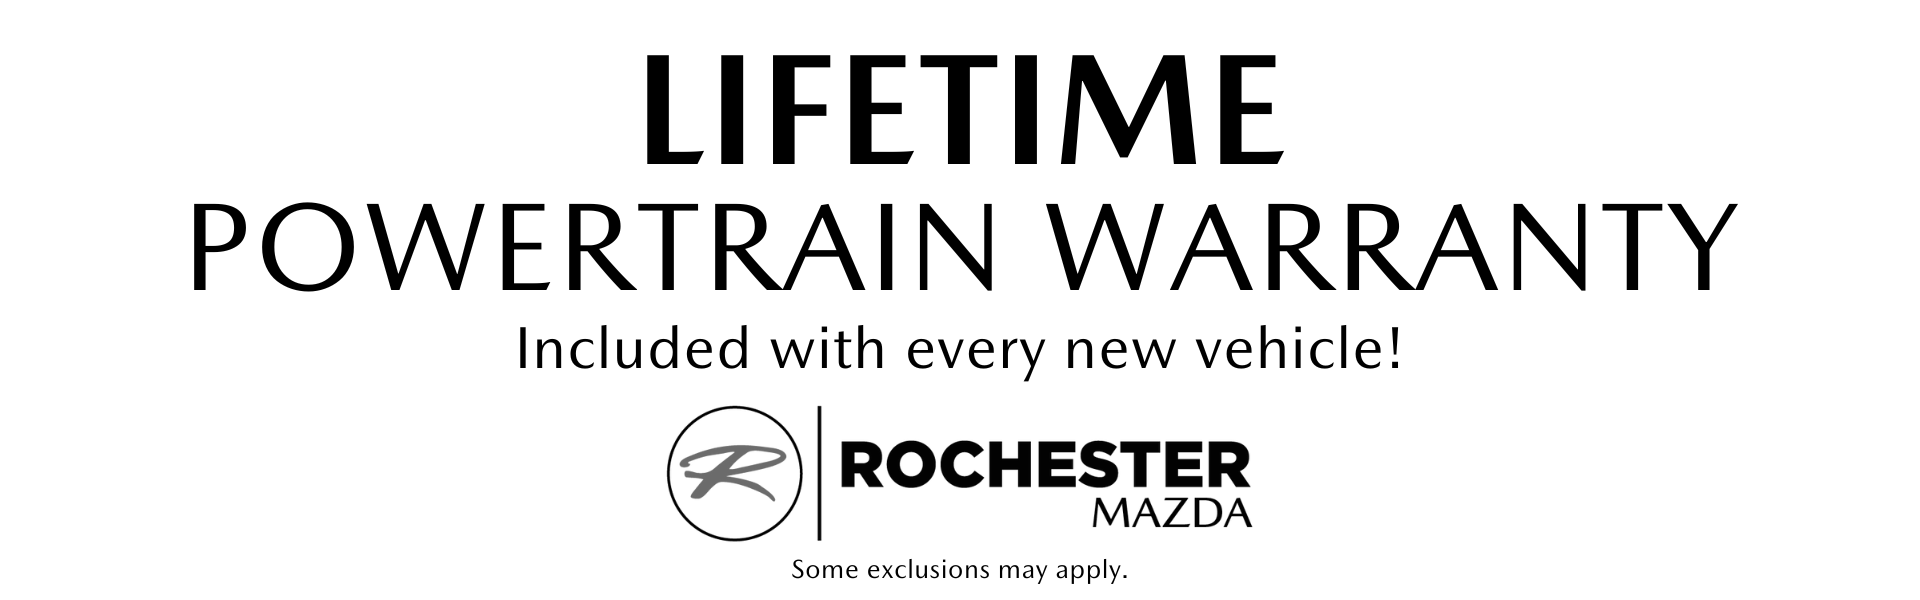 Lifetime Powertrain Warranty included with every new vehicle at Rochester Mazda